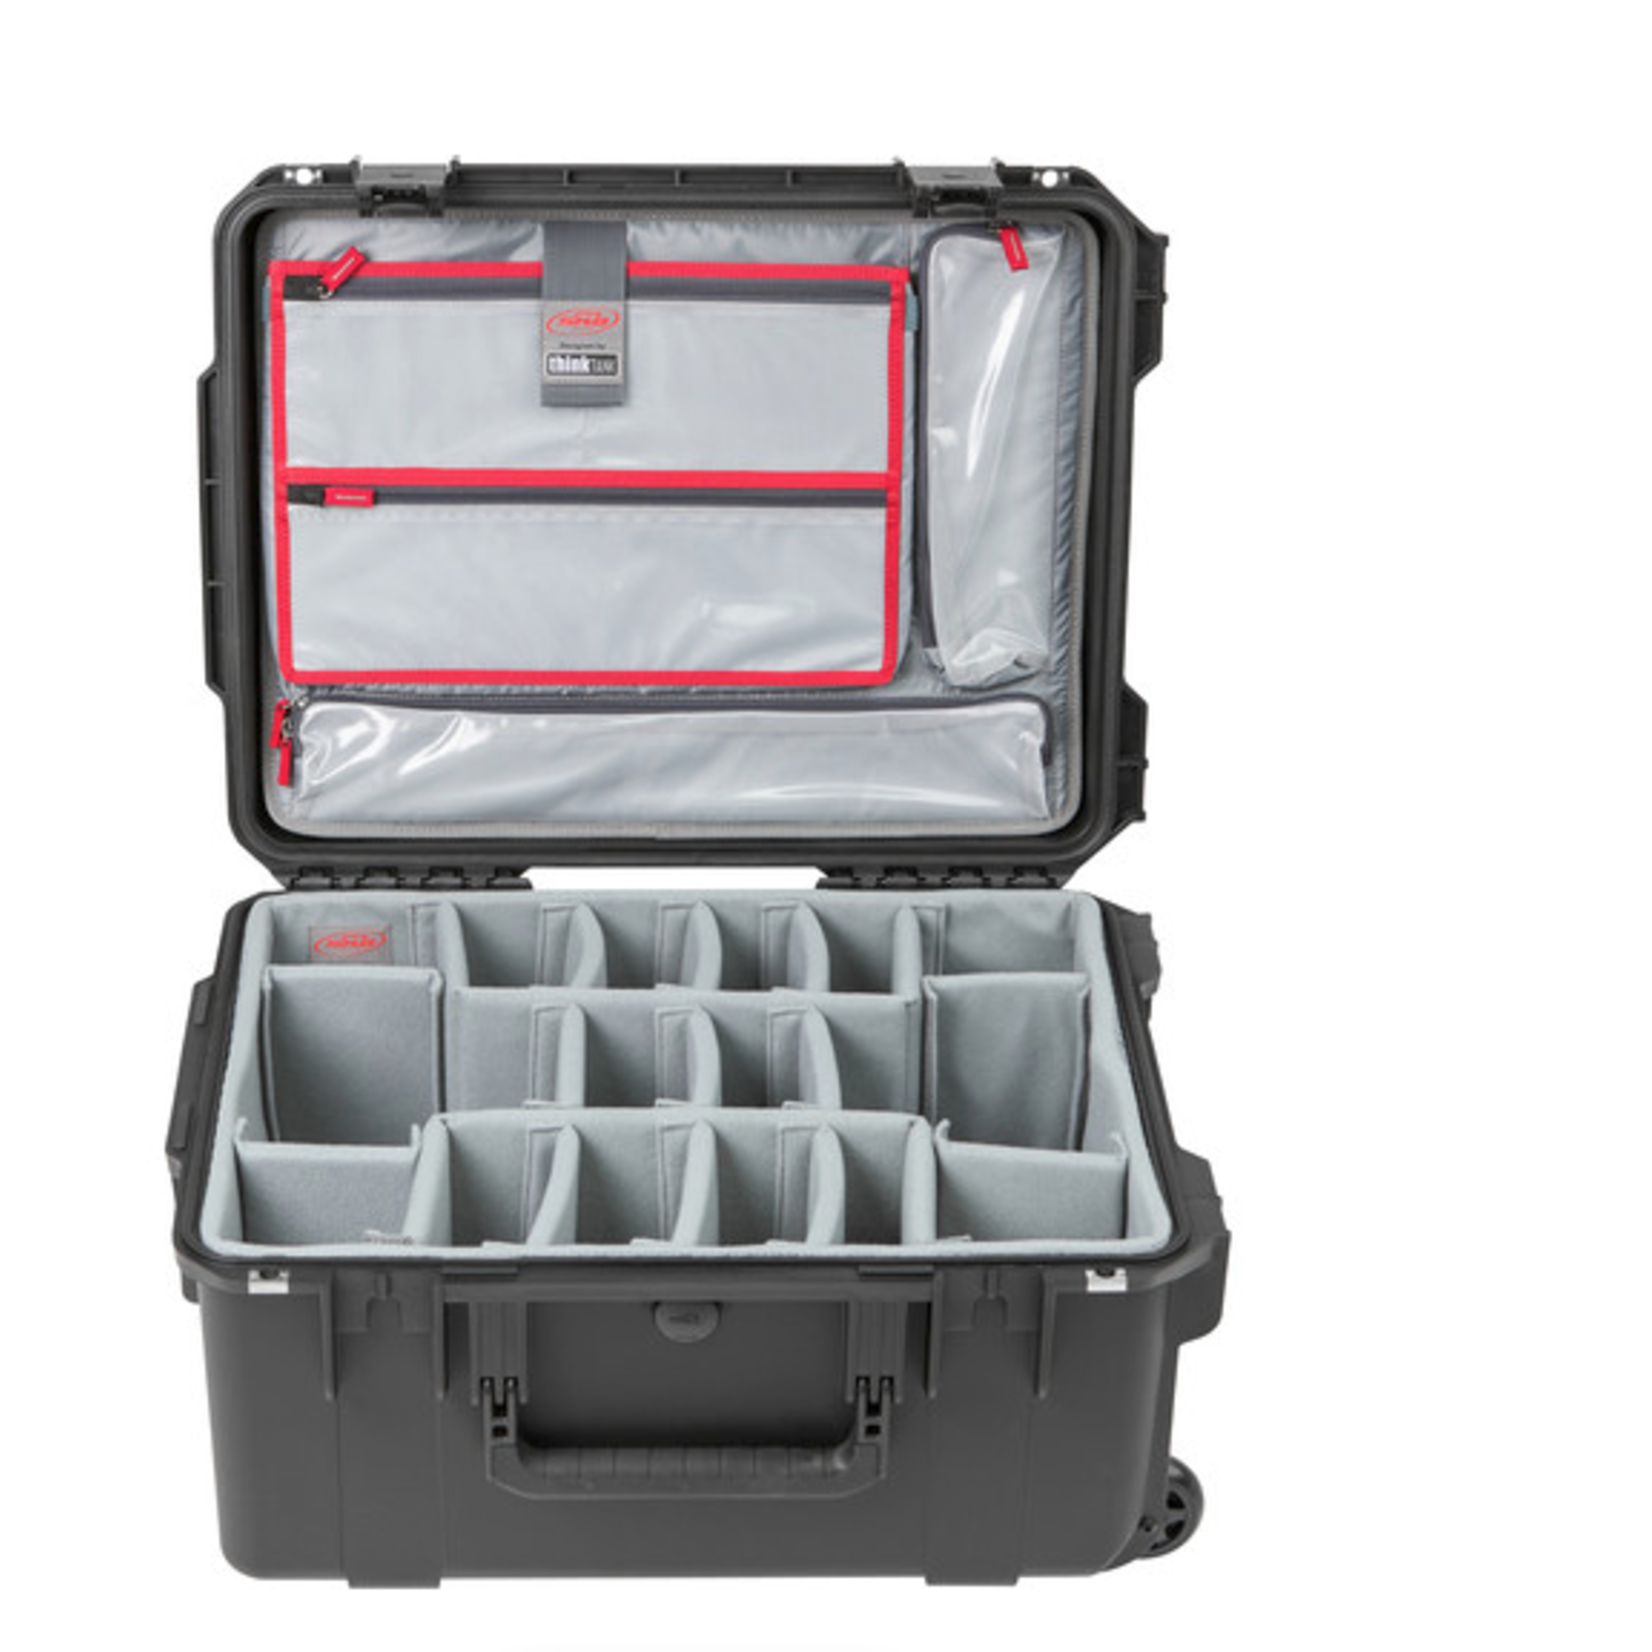 SKB Cases SKB iSeries 2015-10 Case with Think Tank Photo Dividers & Lid Organizer (Black)